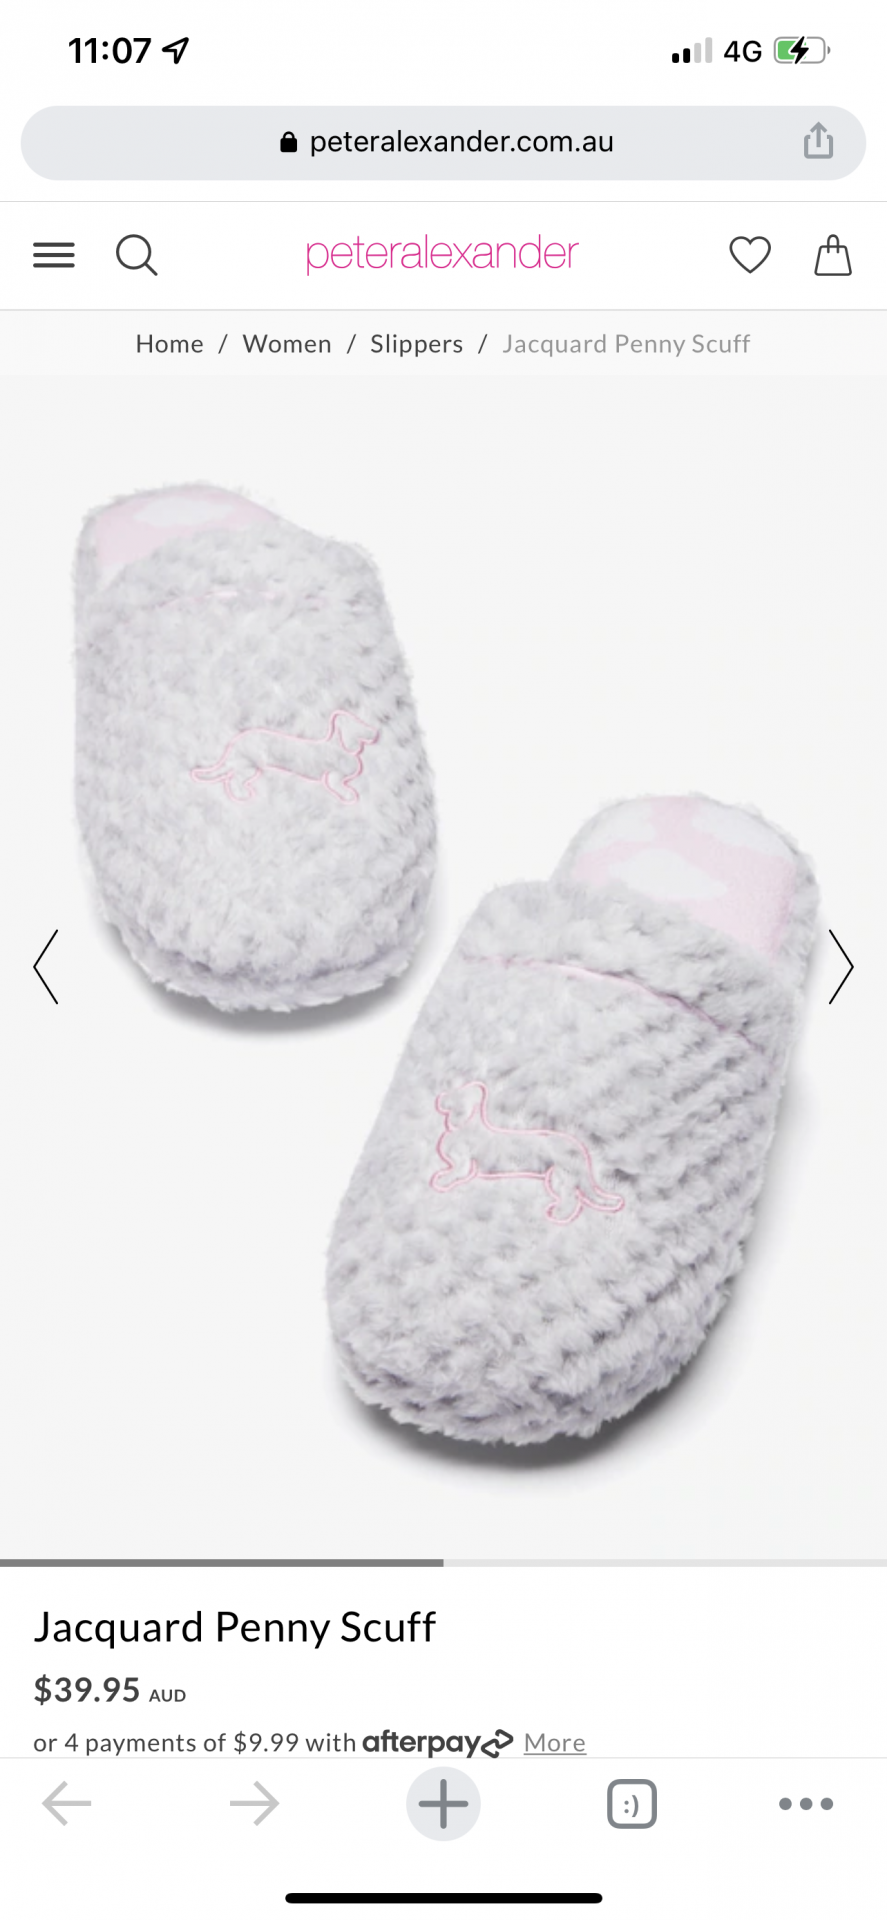 Jacquard Penny Scuff Slippers - Peter Alexander